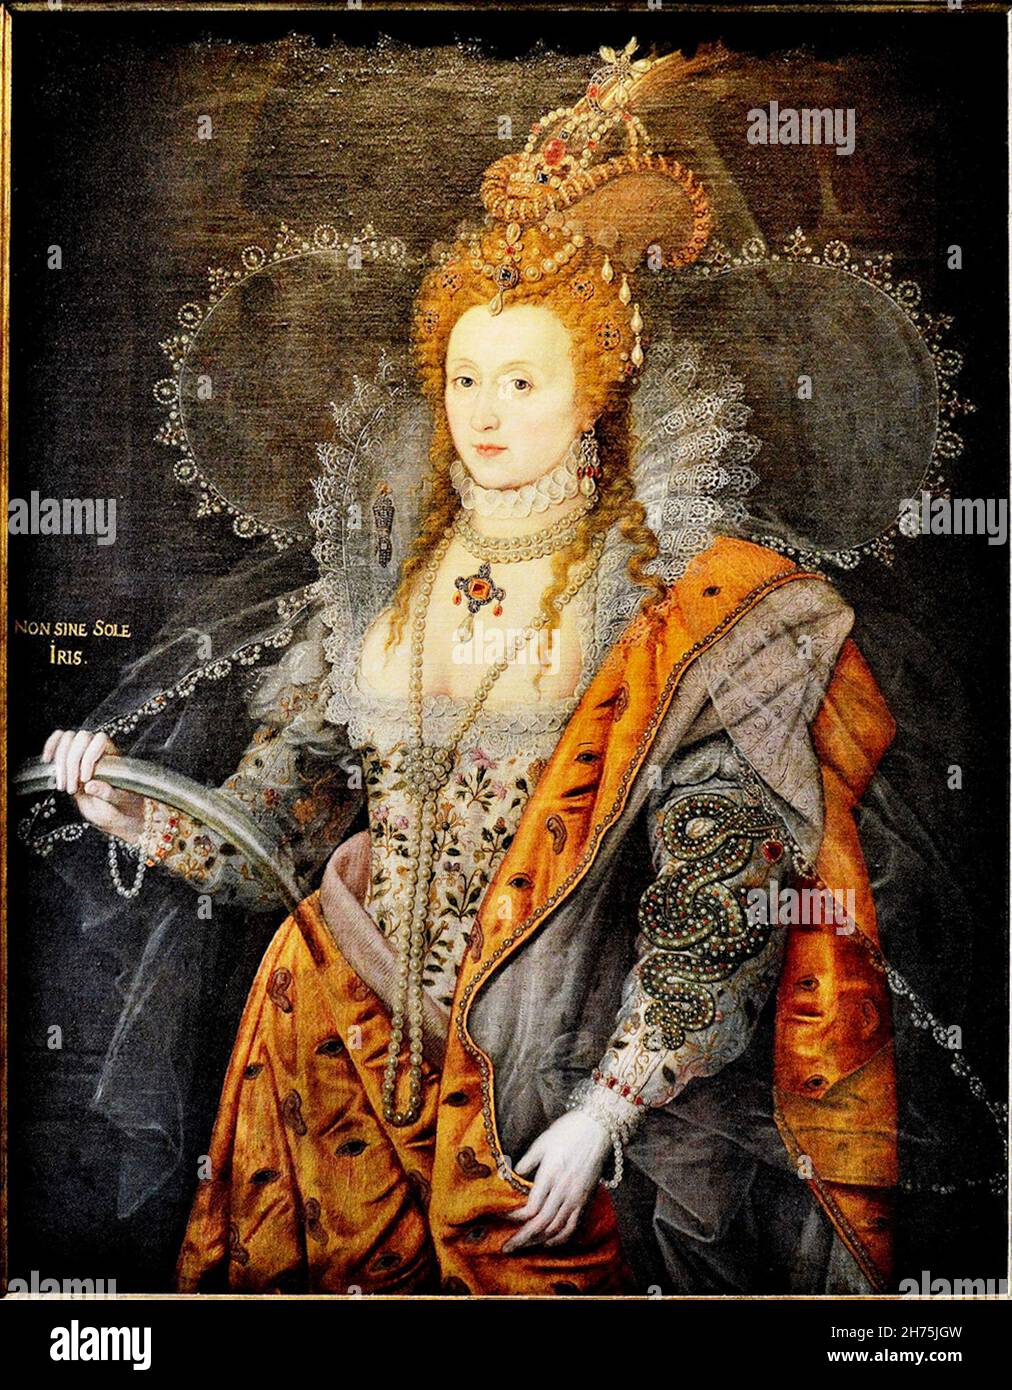 Queen Elizabeth the First of England - Isaac Oliver - Rainbow Portrait Stock Photo